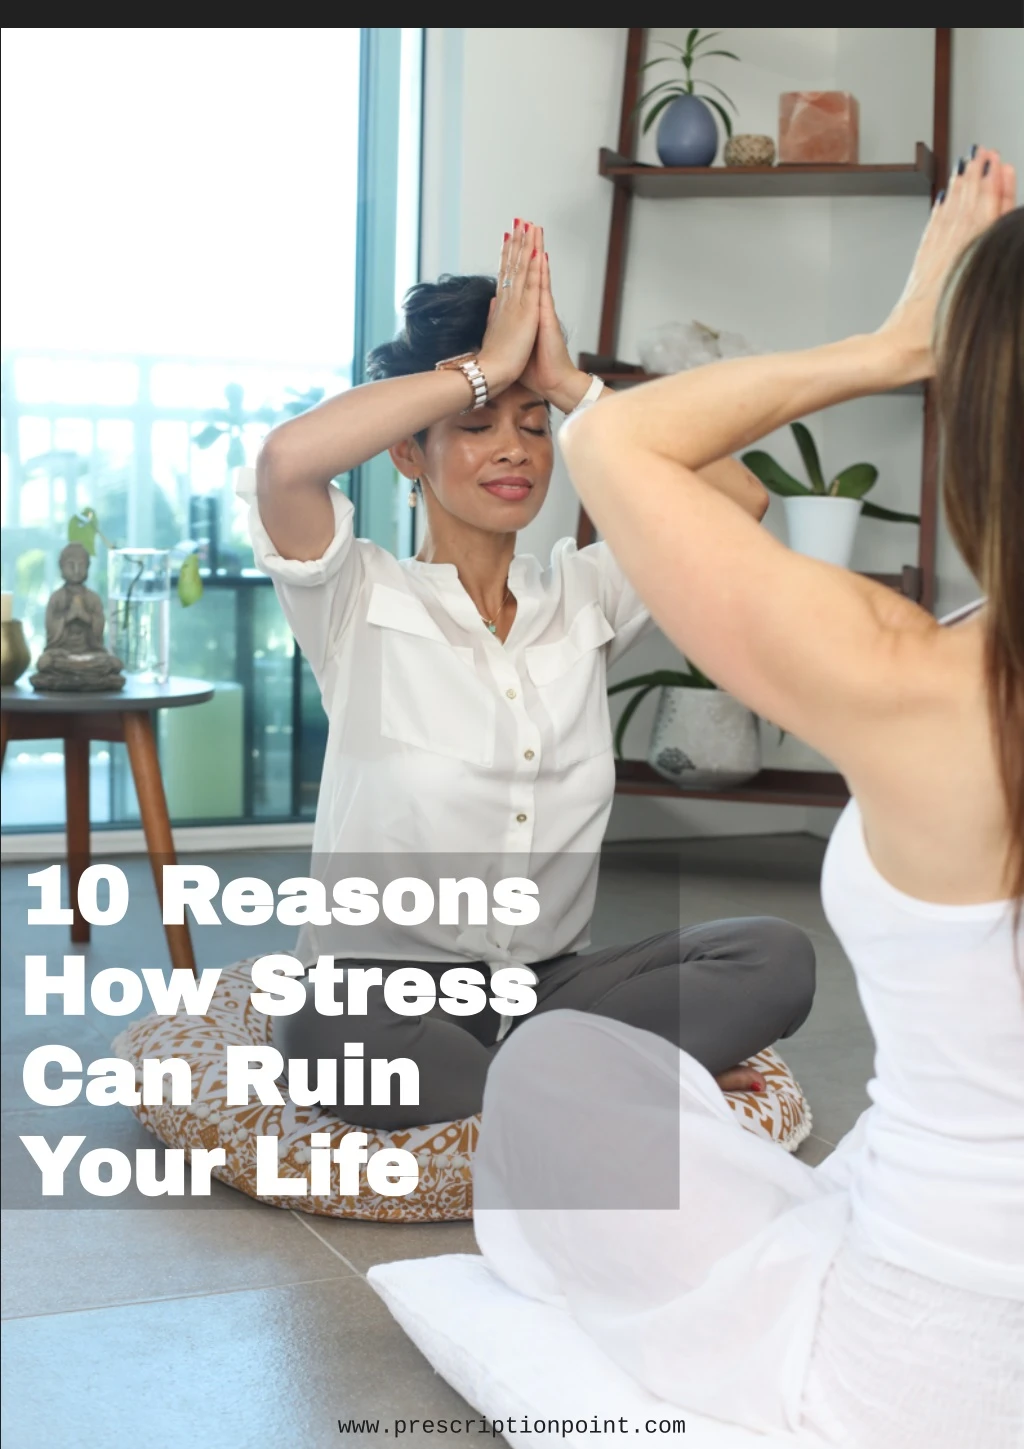 10 reasons 10 reasons how stress how stress